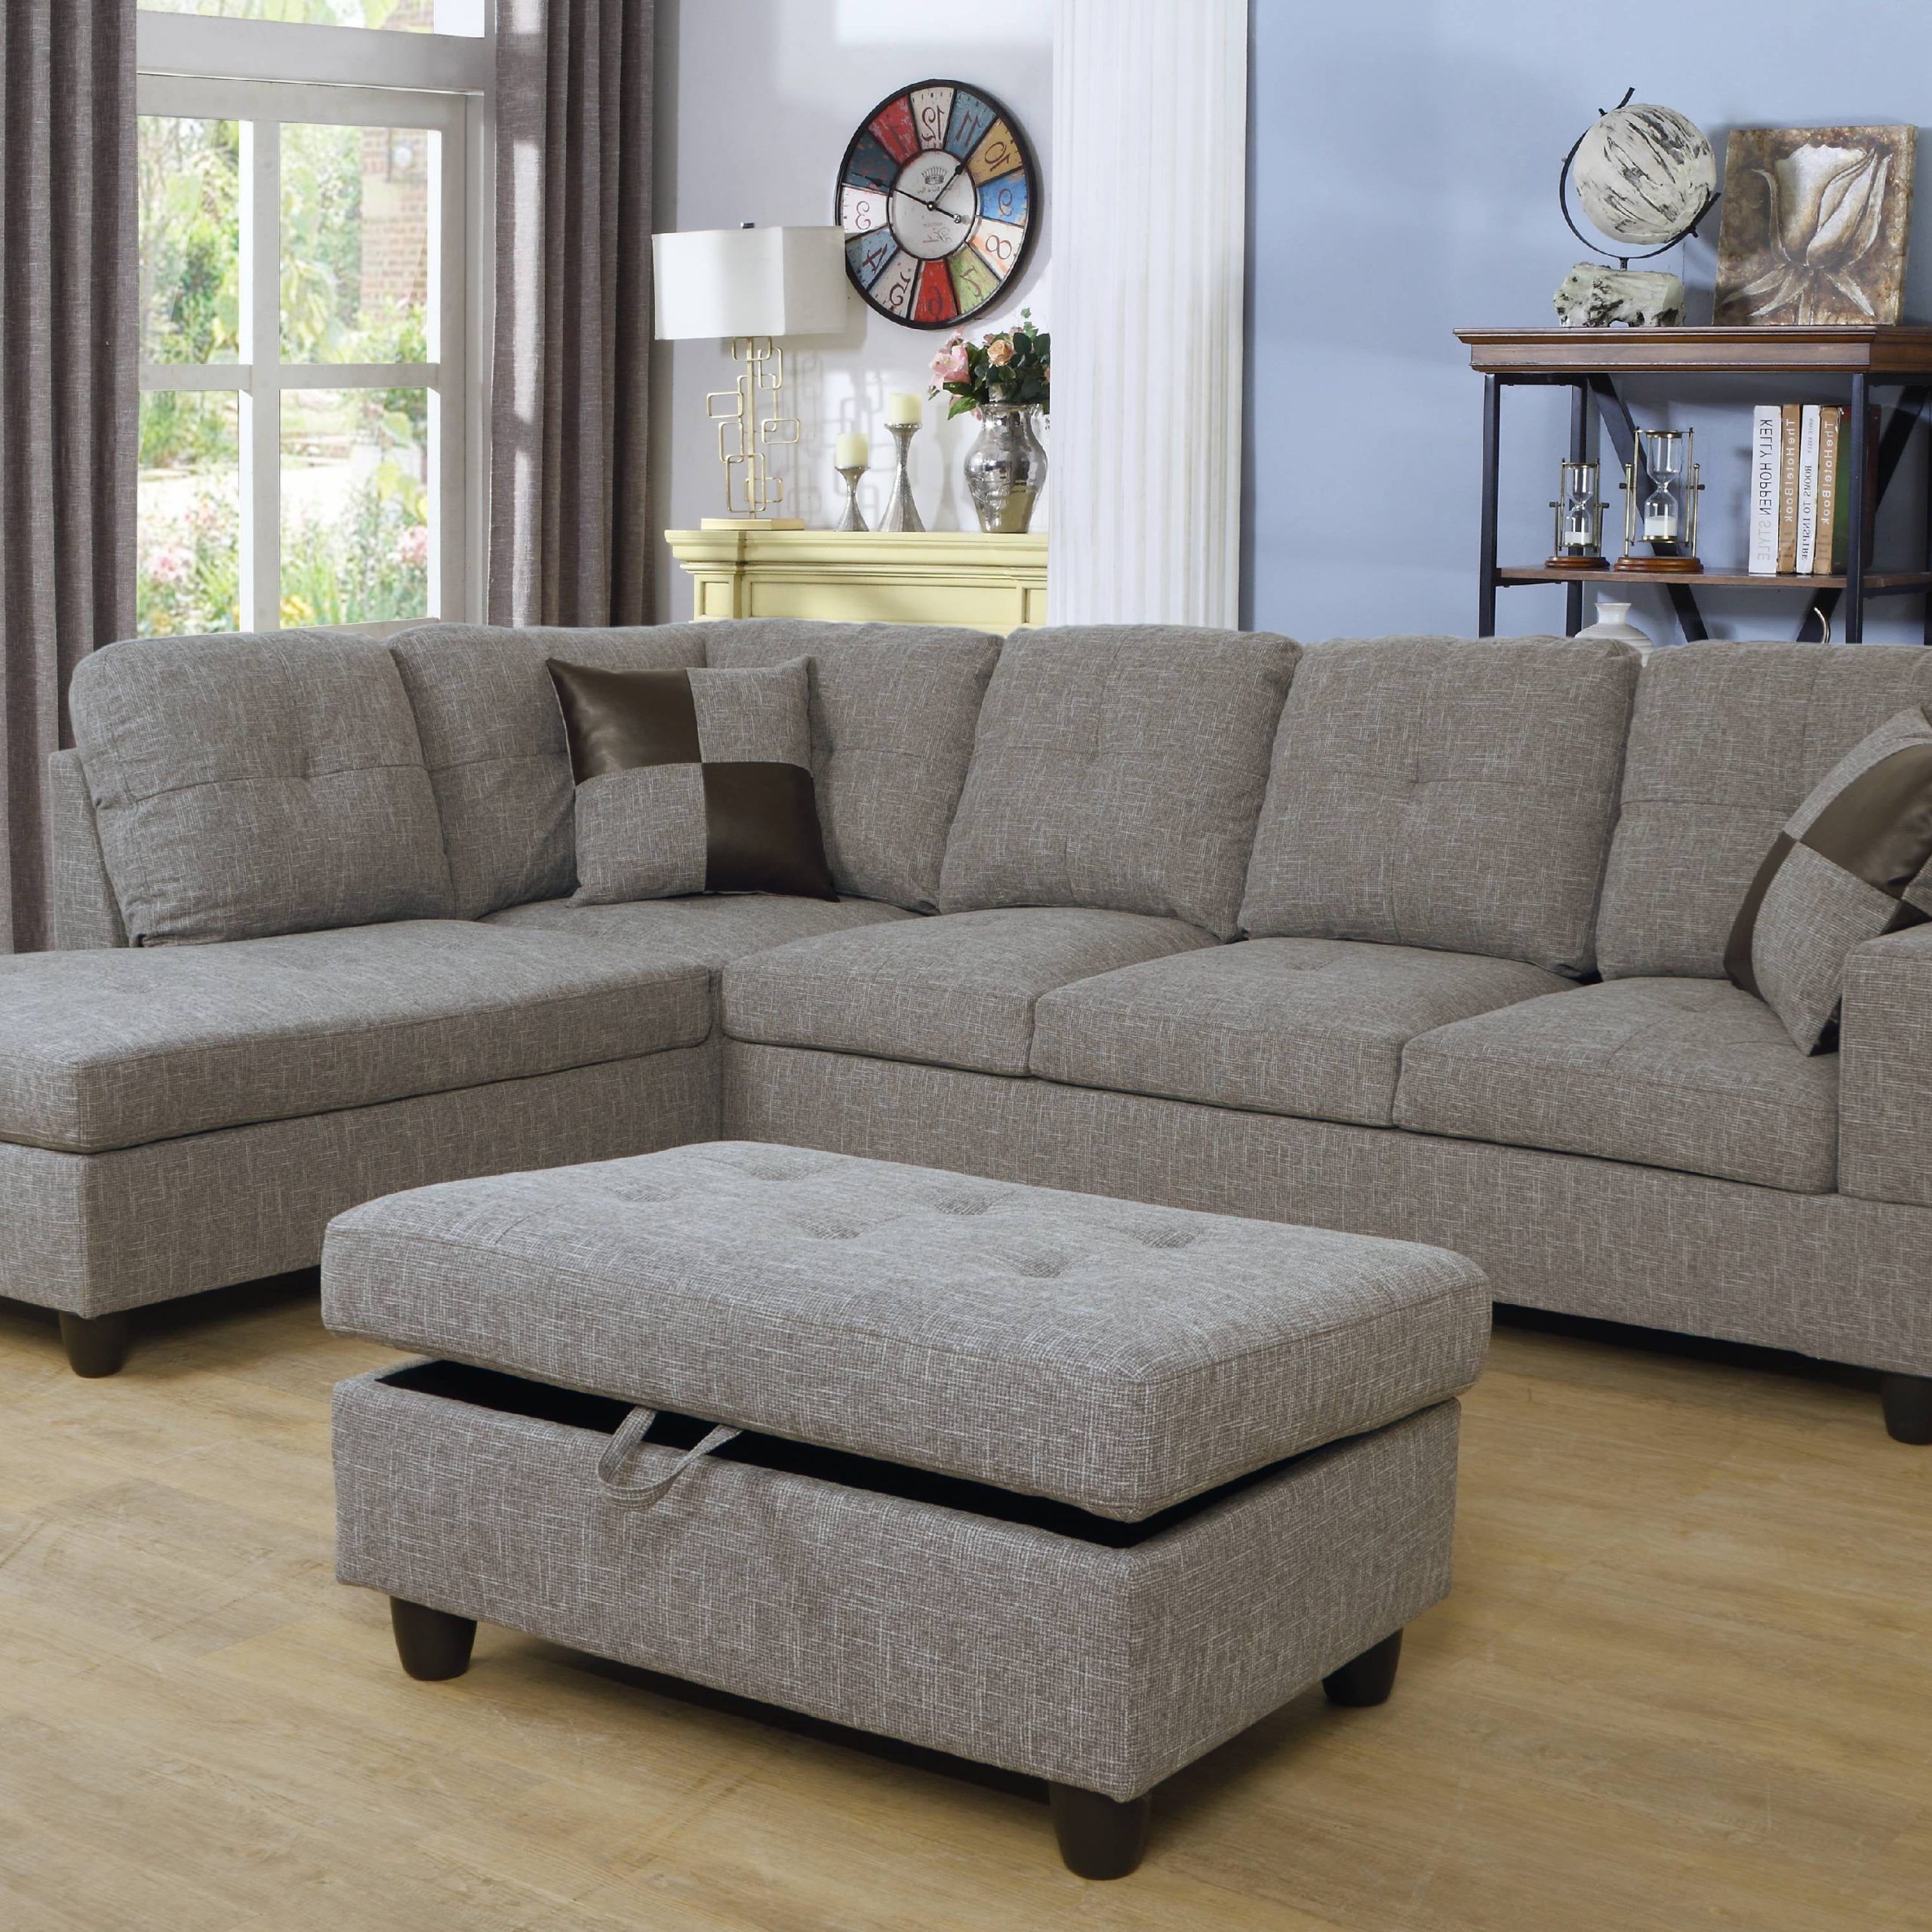 Ashey Furniture – L Shape Sectional Sofa Set With Storage Ottoman Within Sofas With Ottomans (Gallery 12 of 20)